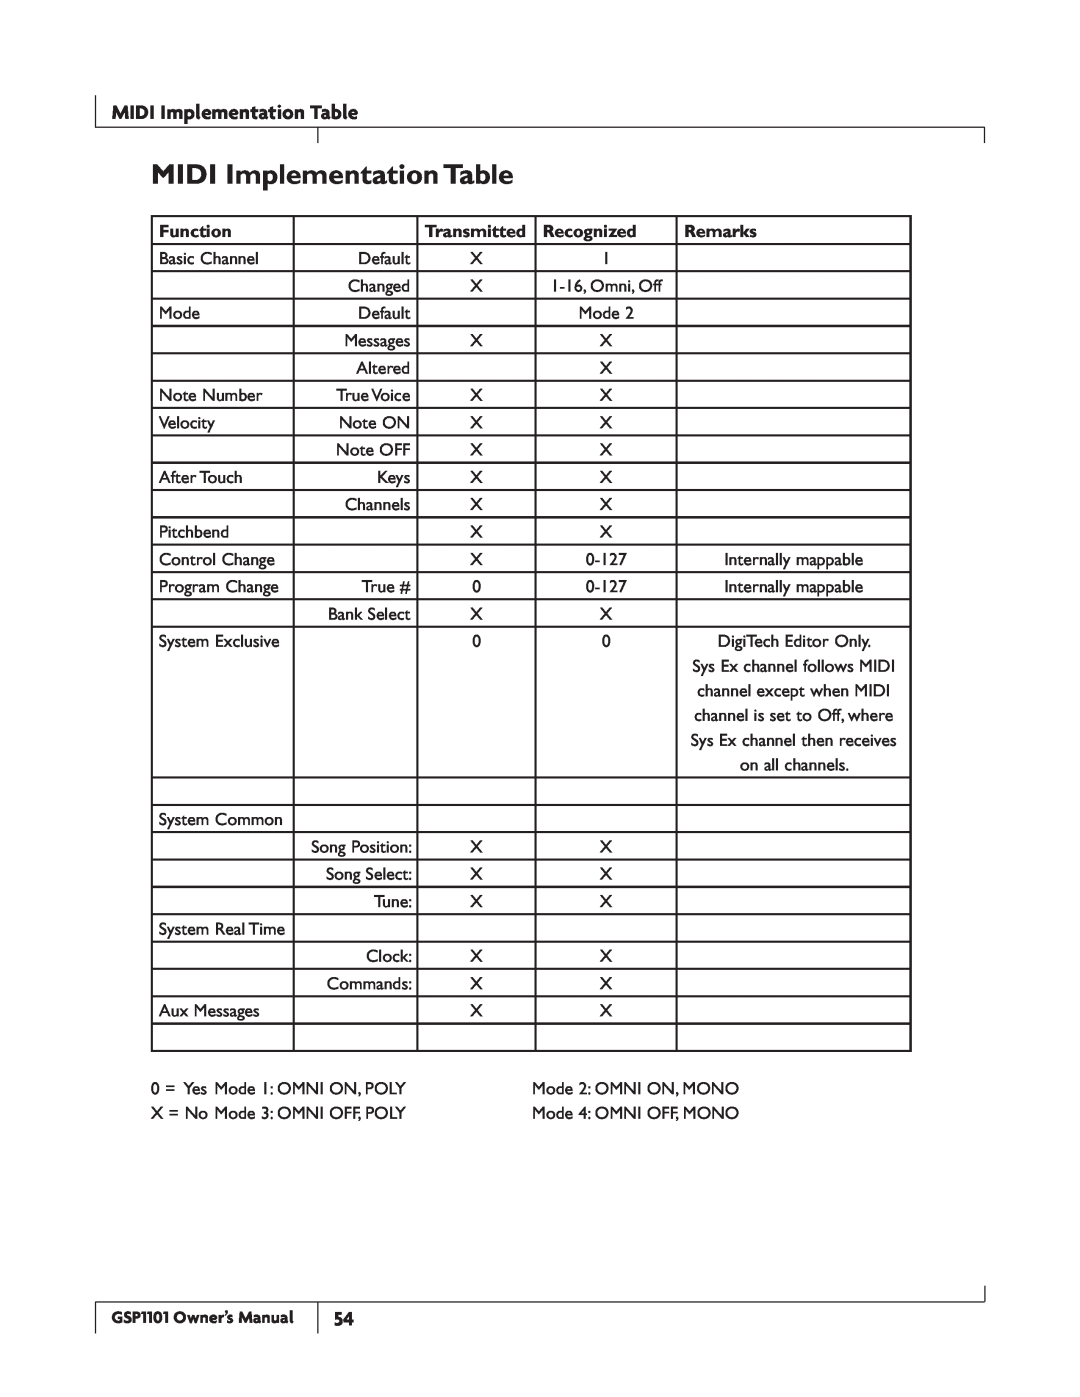 DigiTech GSP1101 owner manual MIDI Implementation Table, Function, Transmitted, Recognized, Remarks 